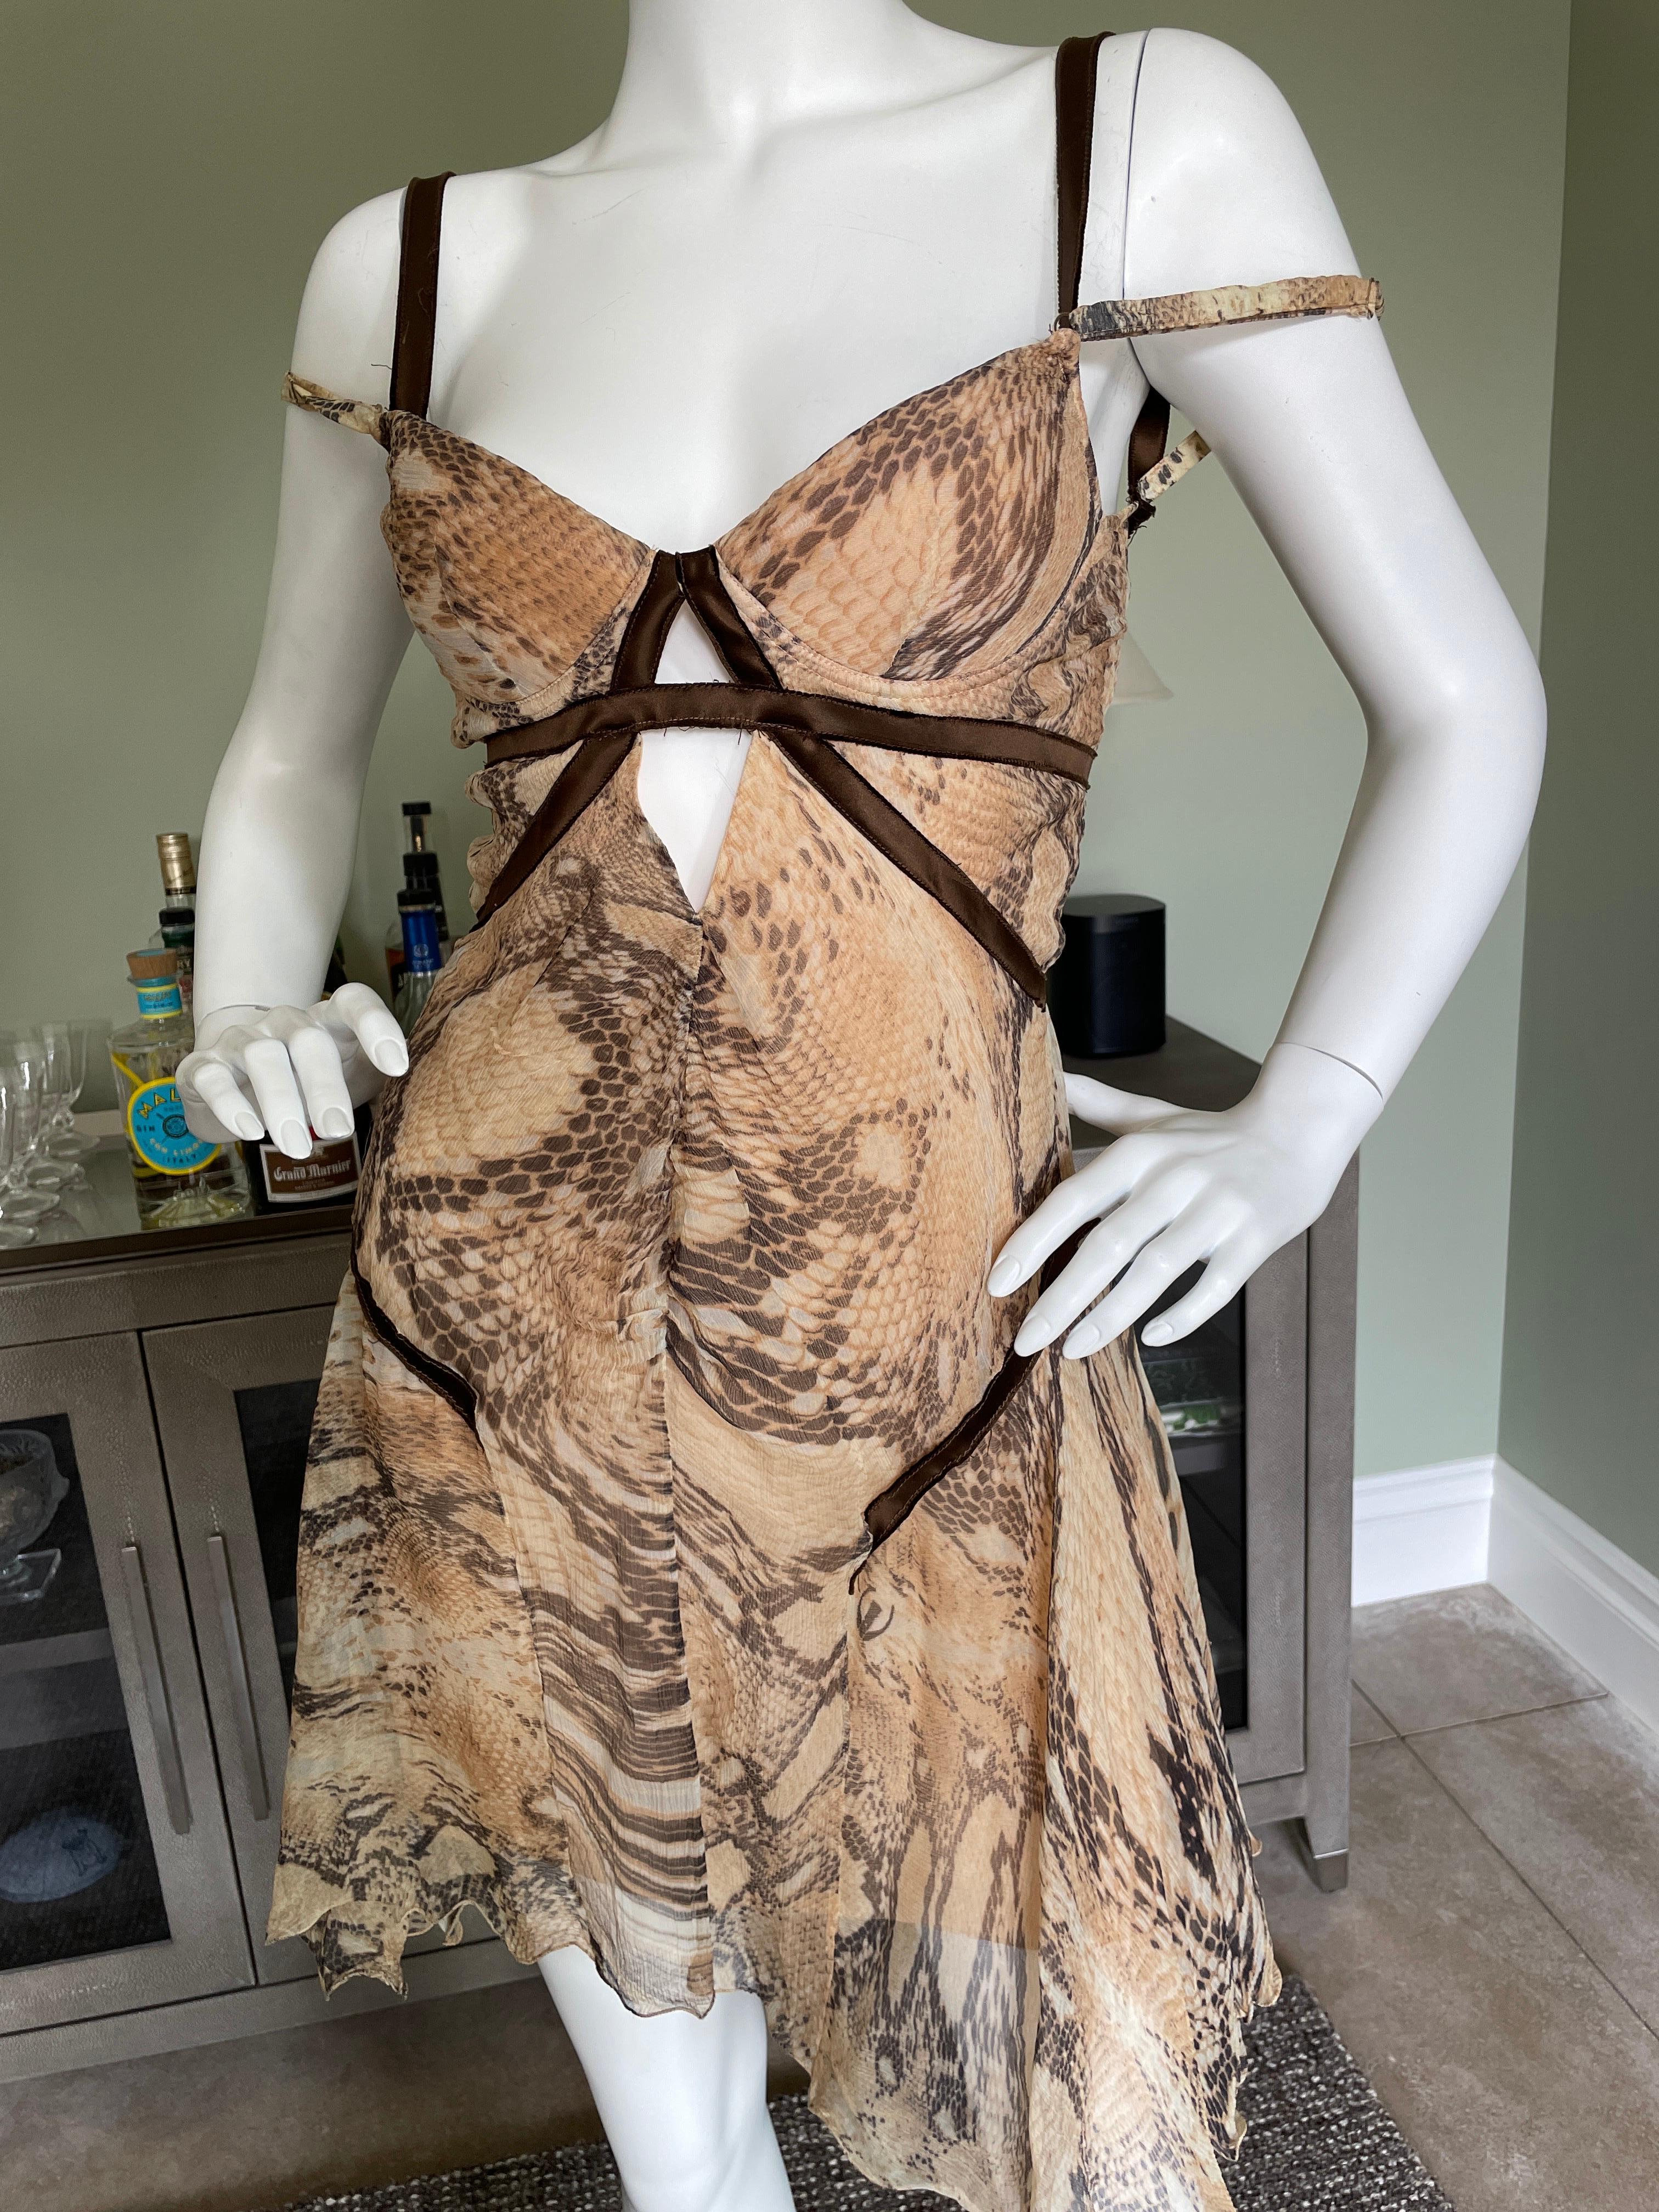 Just Cavalli Vintage Reptile Print Silk Keyhole Dress by Roberto Cavalli .
This is so pretty, looks better on live model.
Size 42, runs small.
Bust 34